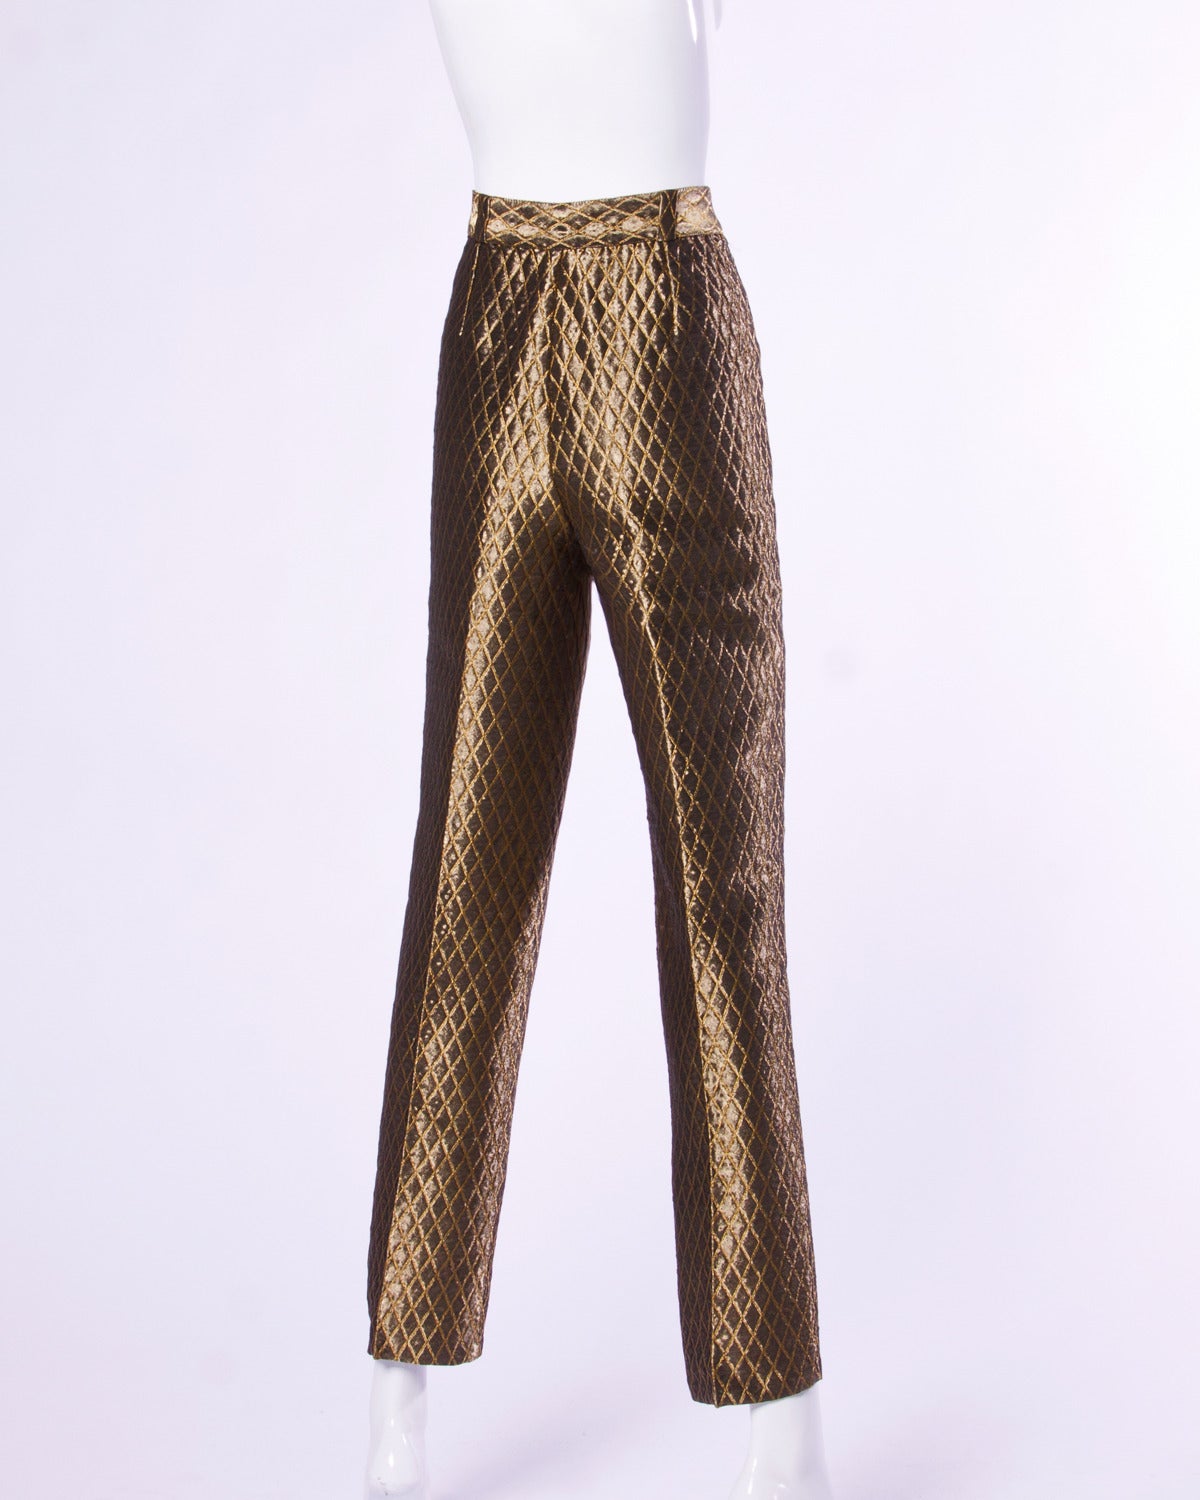 Phenomenal metallic gold quilted pants by Gianni Versace Couture. High waist and straight leg cut.

Details:

Unlined
Side Pockets
Side Hook and Button Closure
Marked Size: 44
Color: Gold Metallic
Fabric: Rayon Blend
Label: Gianni Versace